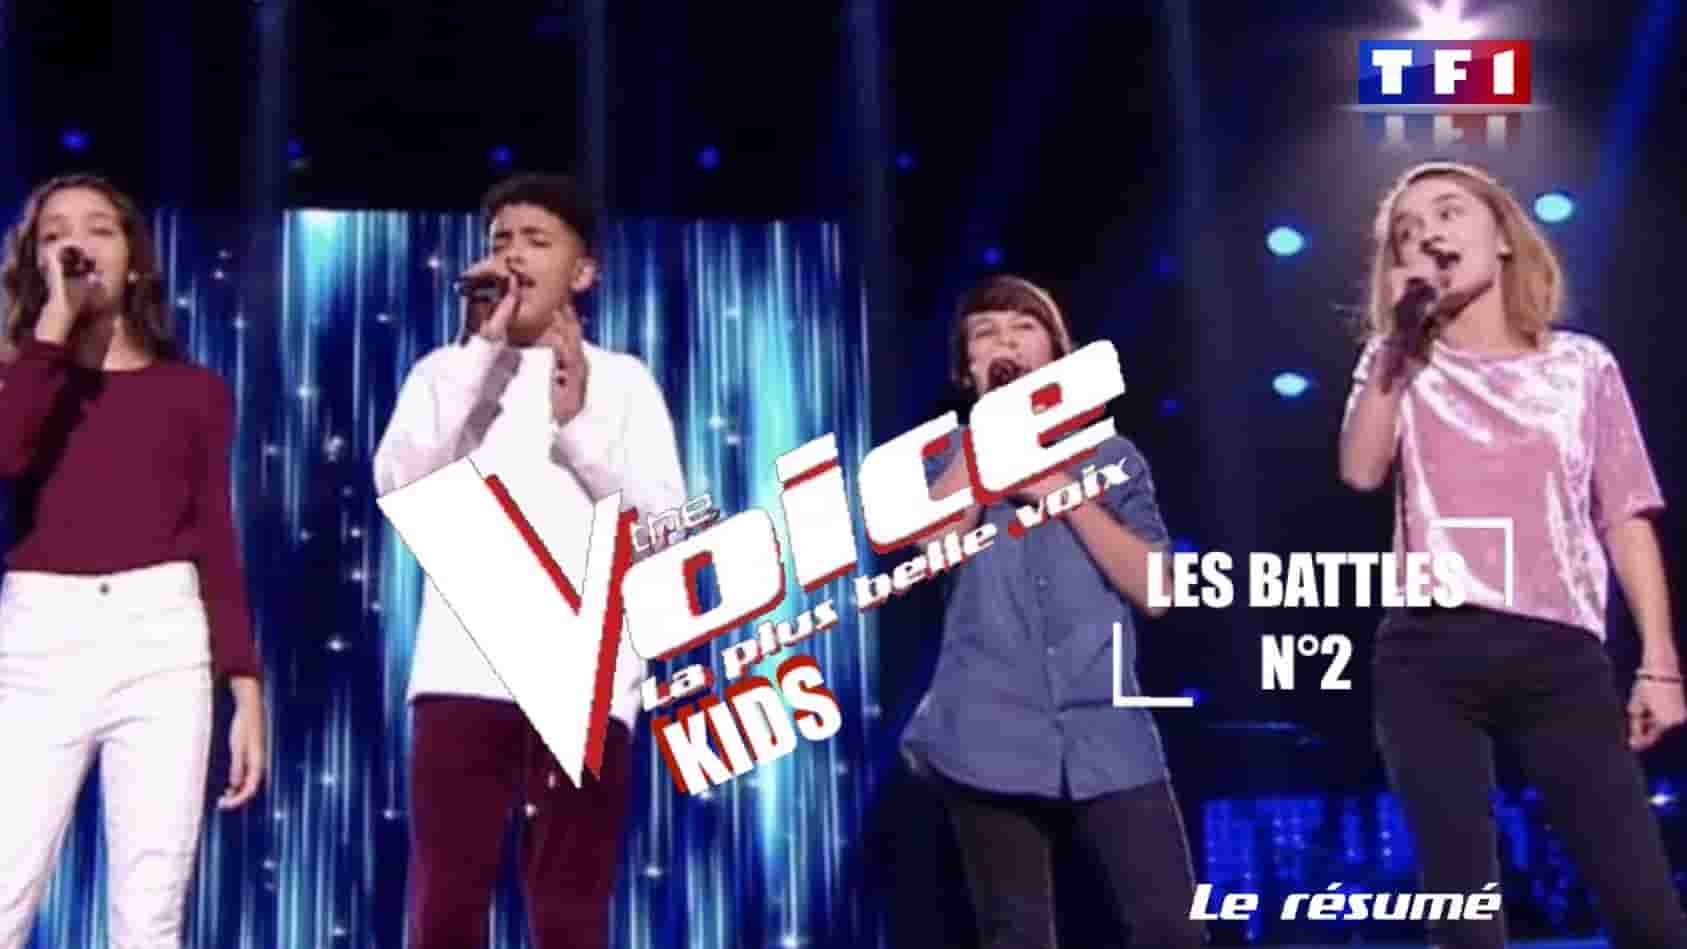 The Voice Kids 5 : Les Battles n°2 - ©/-\ll in One TV, All rights reserved. Do not copy. Reproduction Interdite